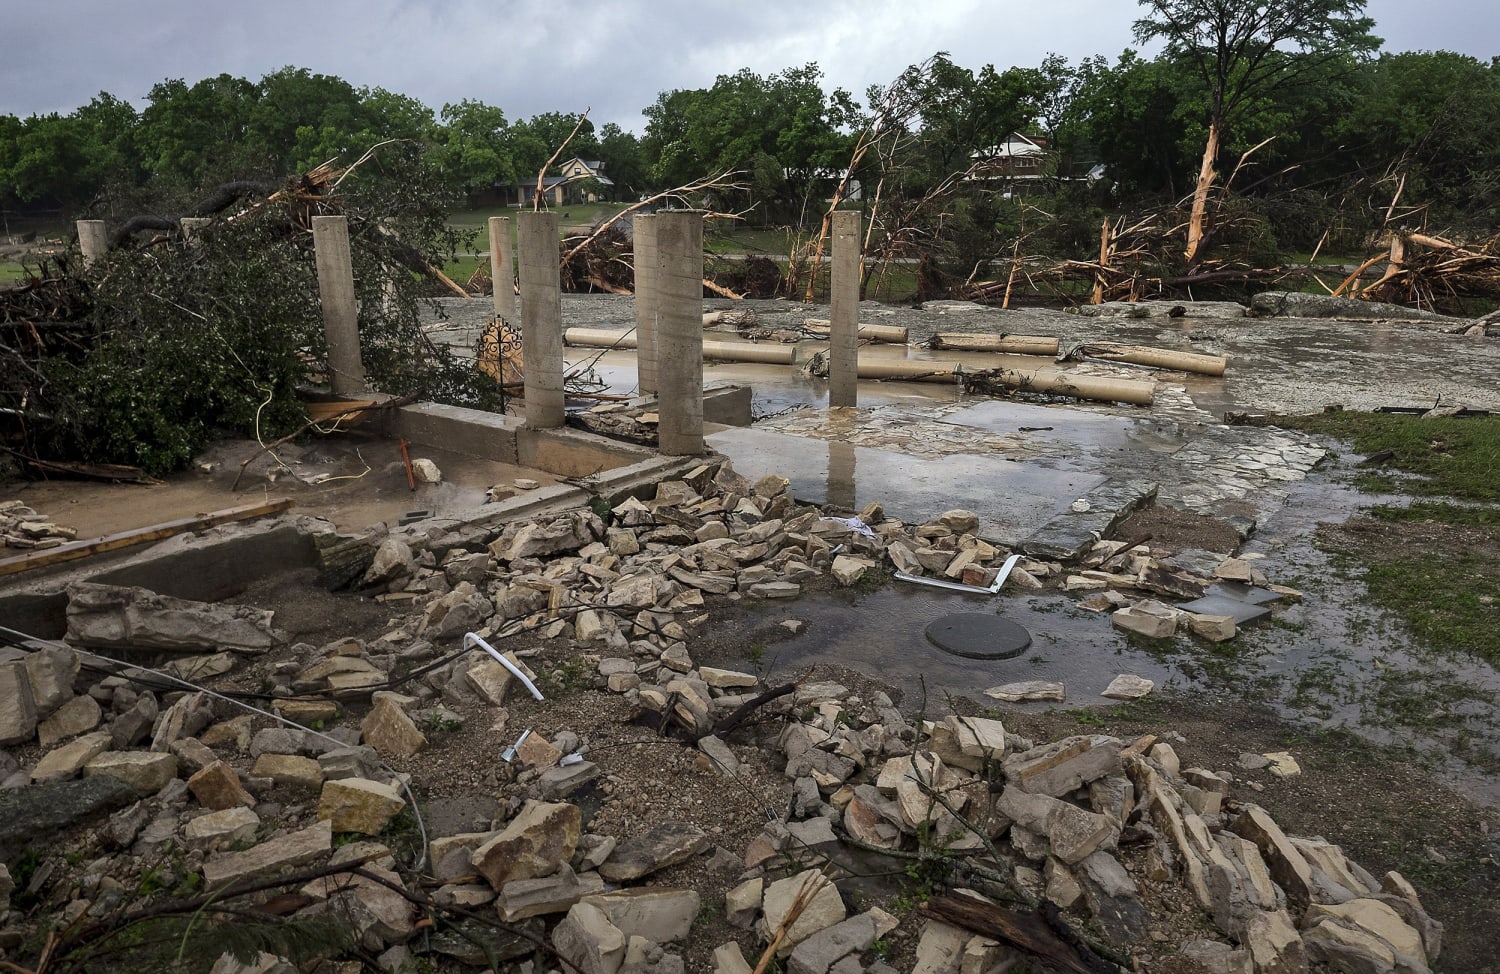 Texas Floods: Eight People in Wimberley Vacation House Are Missing